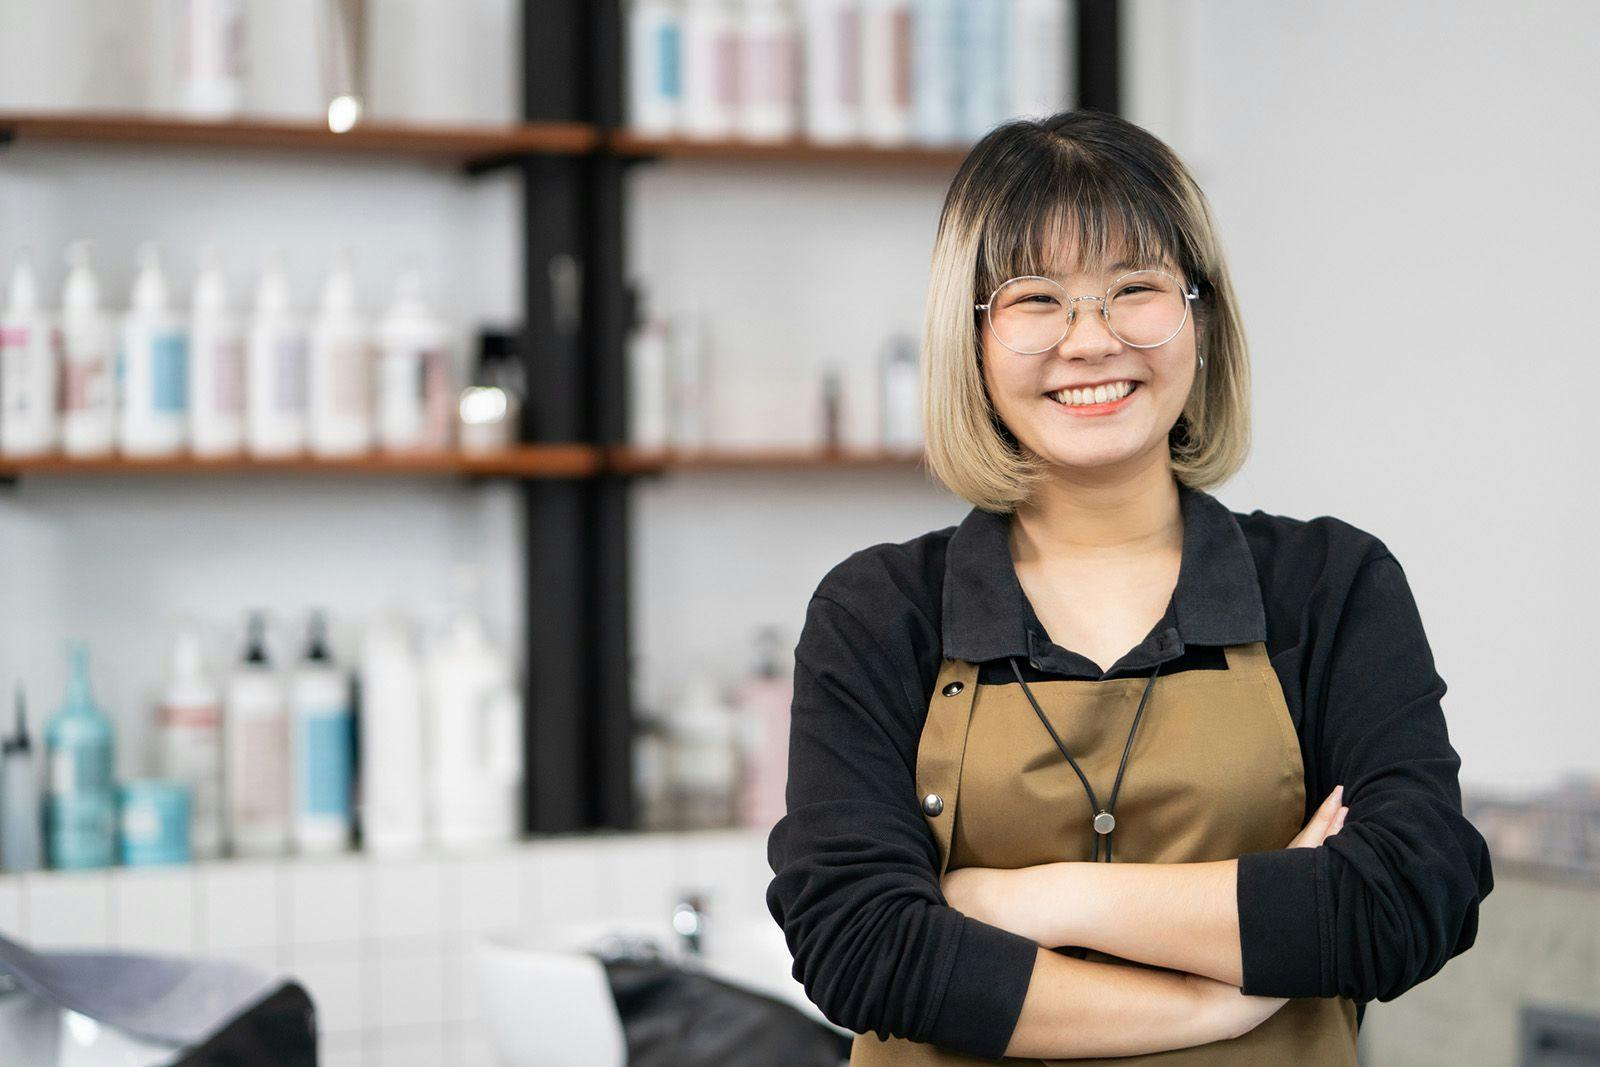 How to Become a Cosmetologist in California